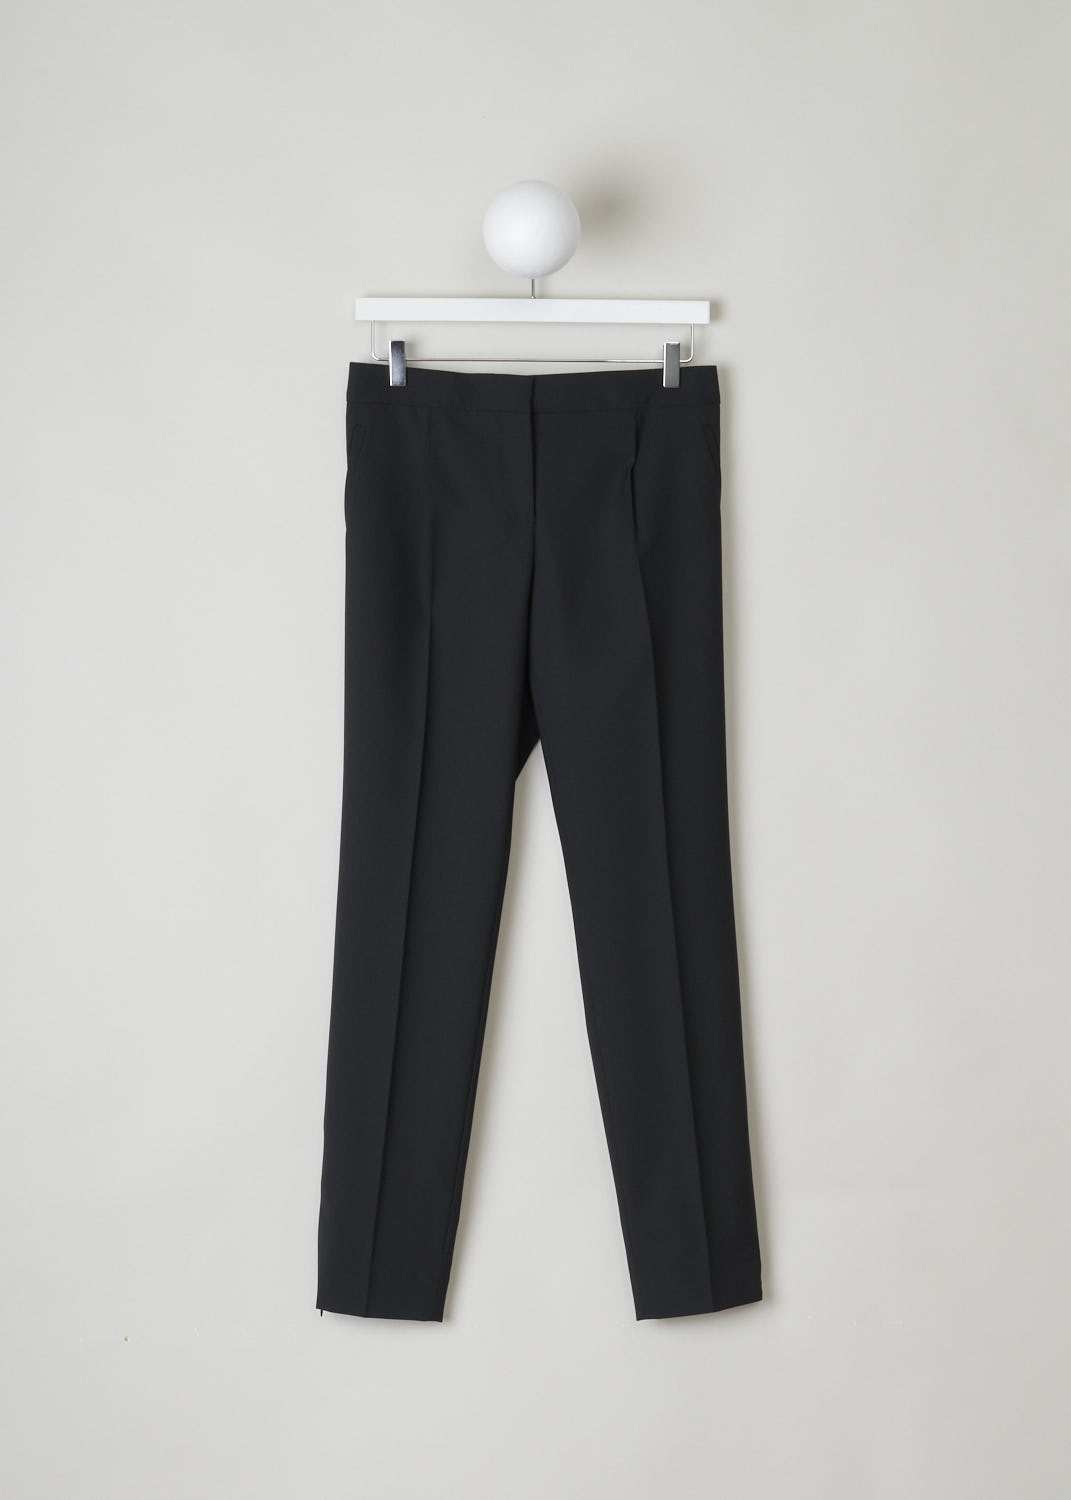 BALENCIAGA, CLASSIC BLACK PANTS WITH SUBTLE ZIPPER DETAIL, 329181_TCJ69_1000, Black, Front, This classic black pants has front creases along the length of the legs. These same creases can also be found on the back of the legs. On the front, welt pockets can be found on either side. On the ends of the legs, concealed zippers can be found that open to about ankle height.
